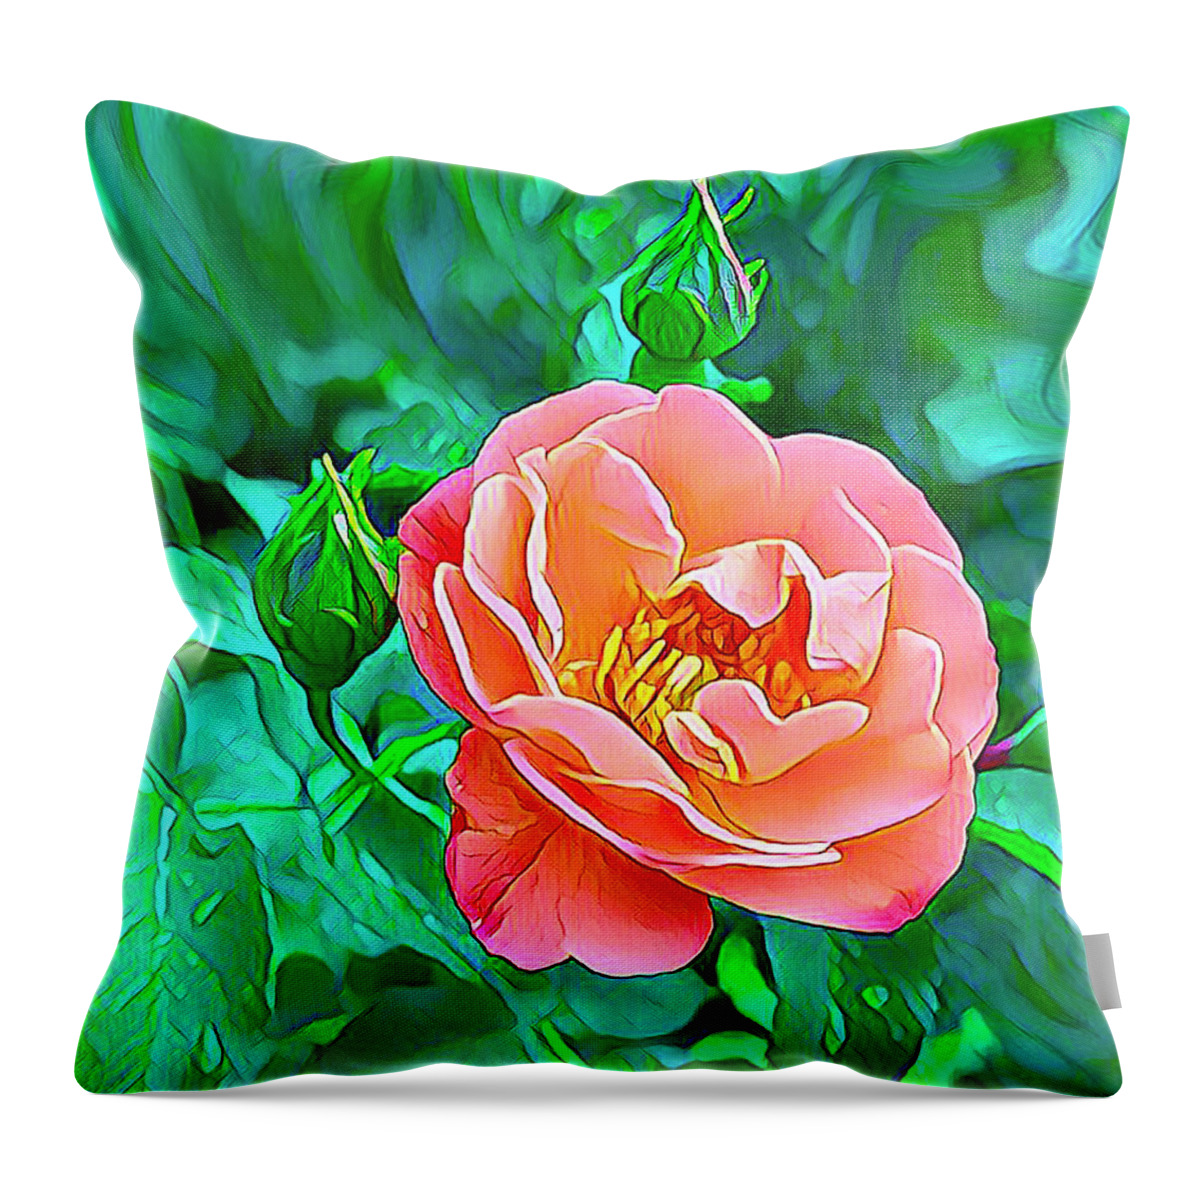 Flowers Throw Pillow featuring the digital art Gorgeous Rose by Nancy Olivia Hoffmann